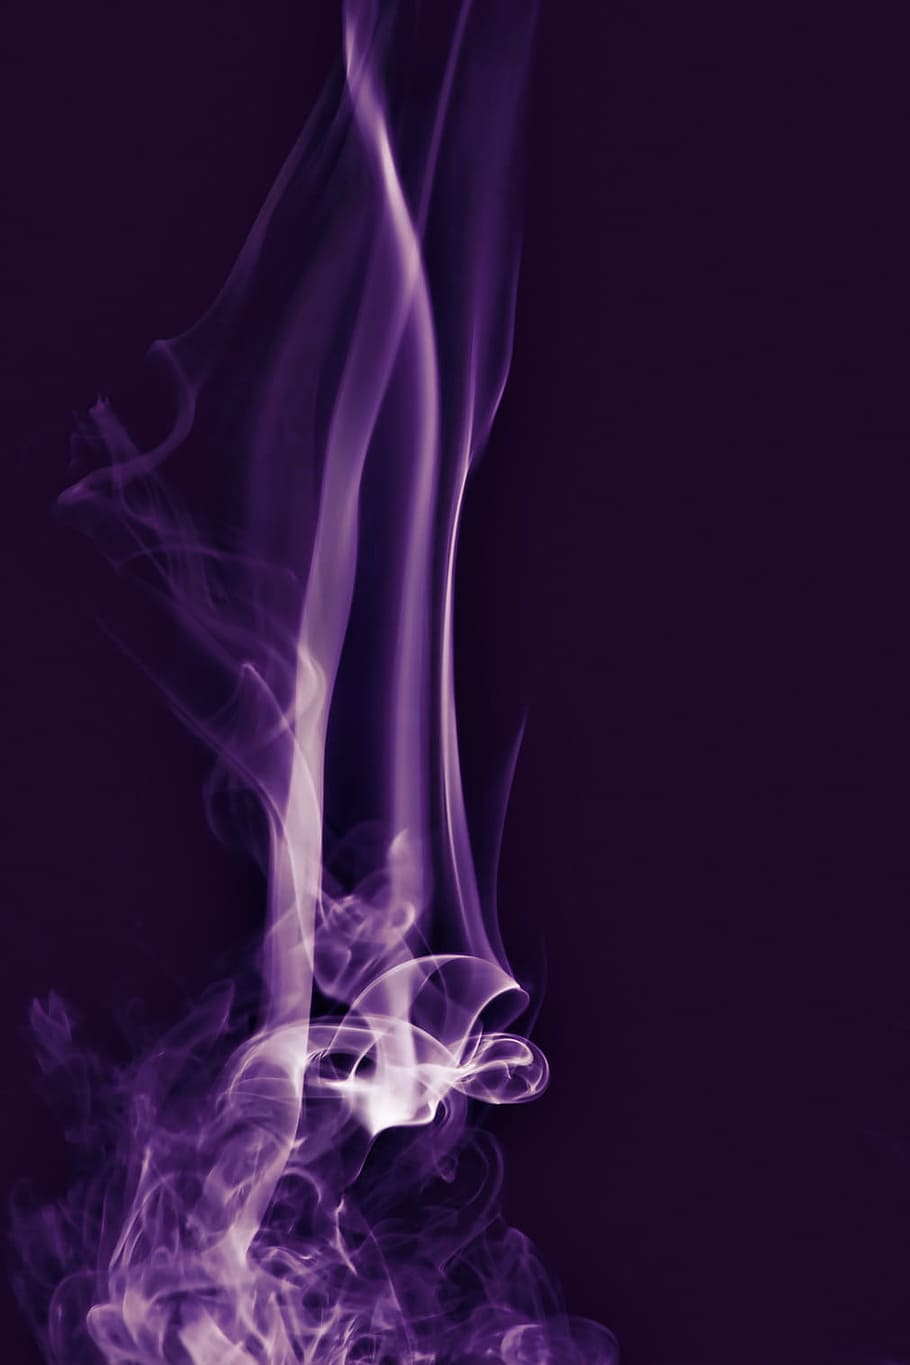 aromatherapy, background, color, smell, smoke, smoke - physical structure, motion, abstract, black background, studio shot